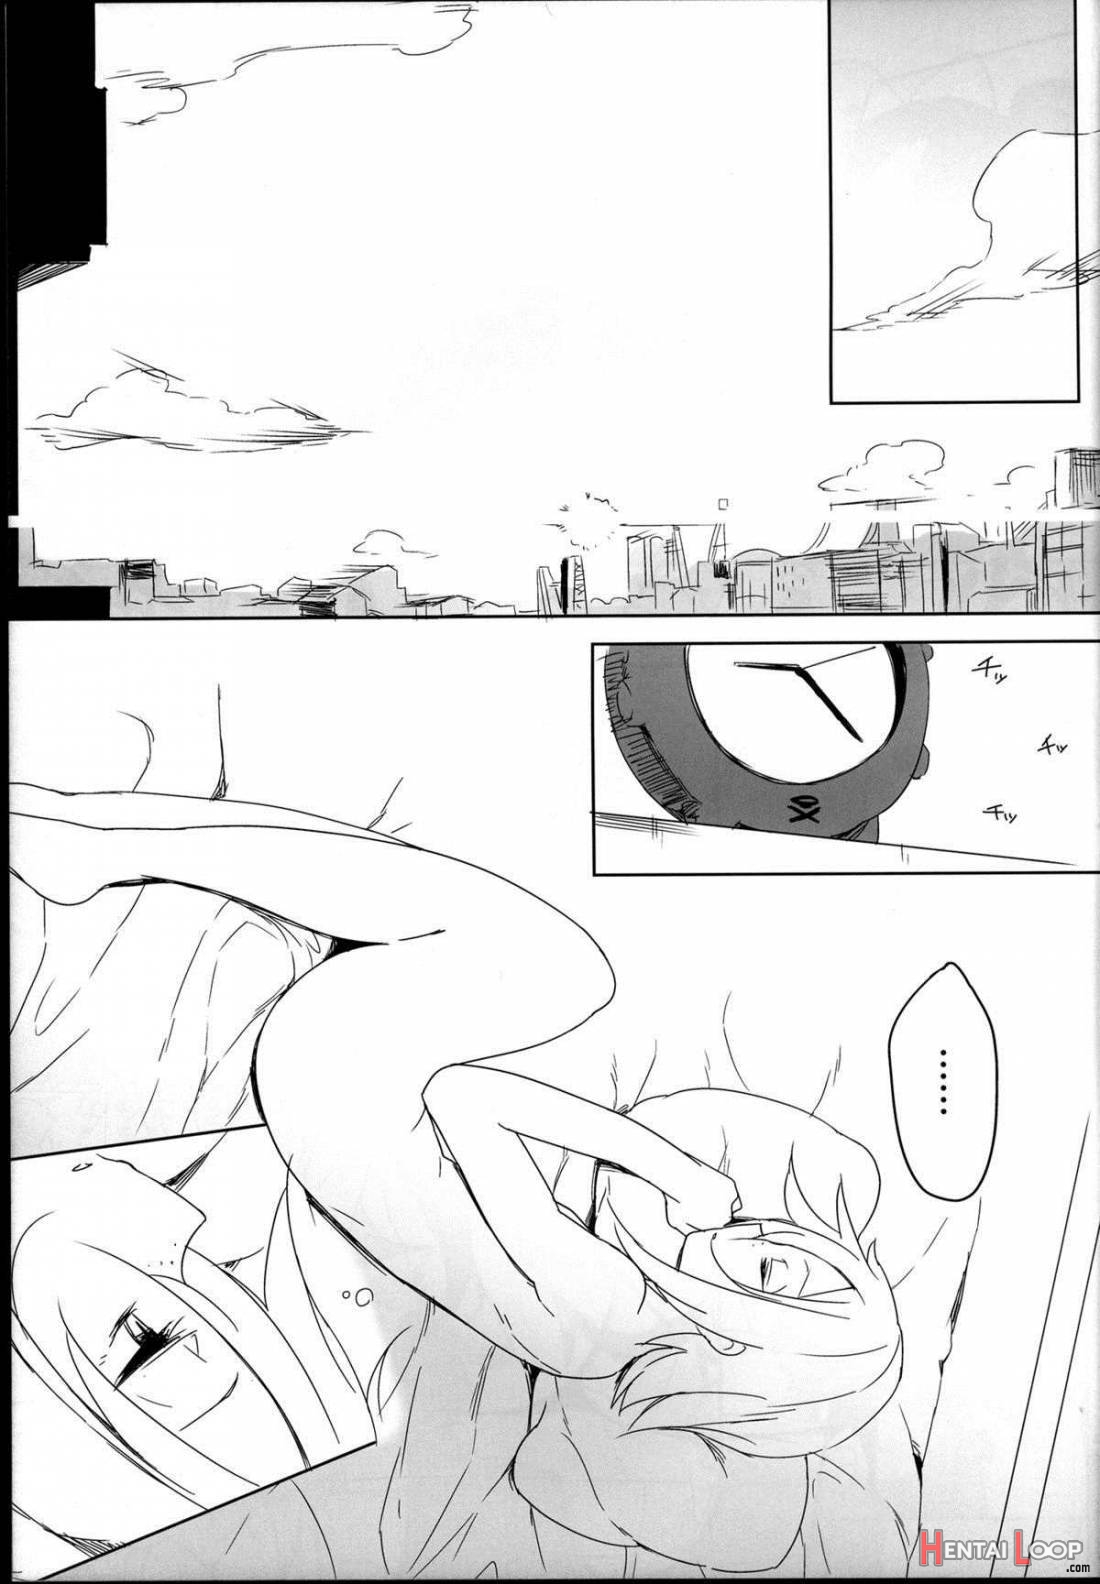 Sweet Collapse page 4